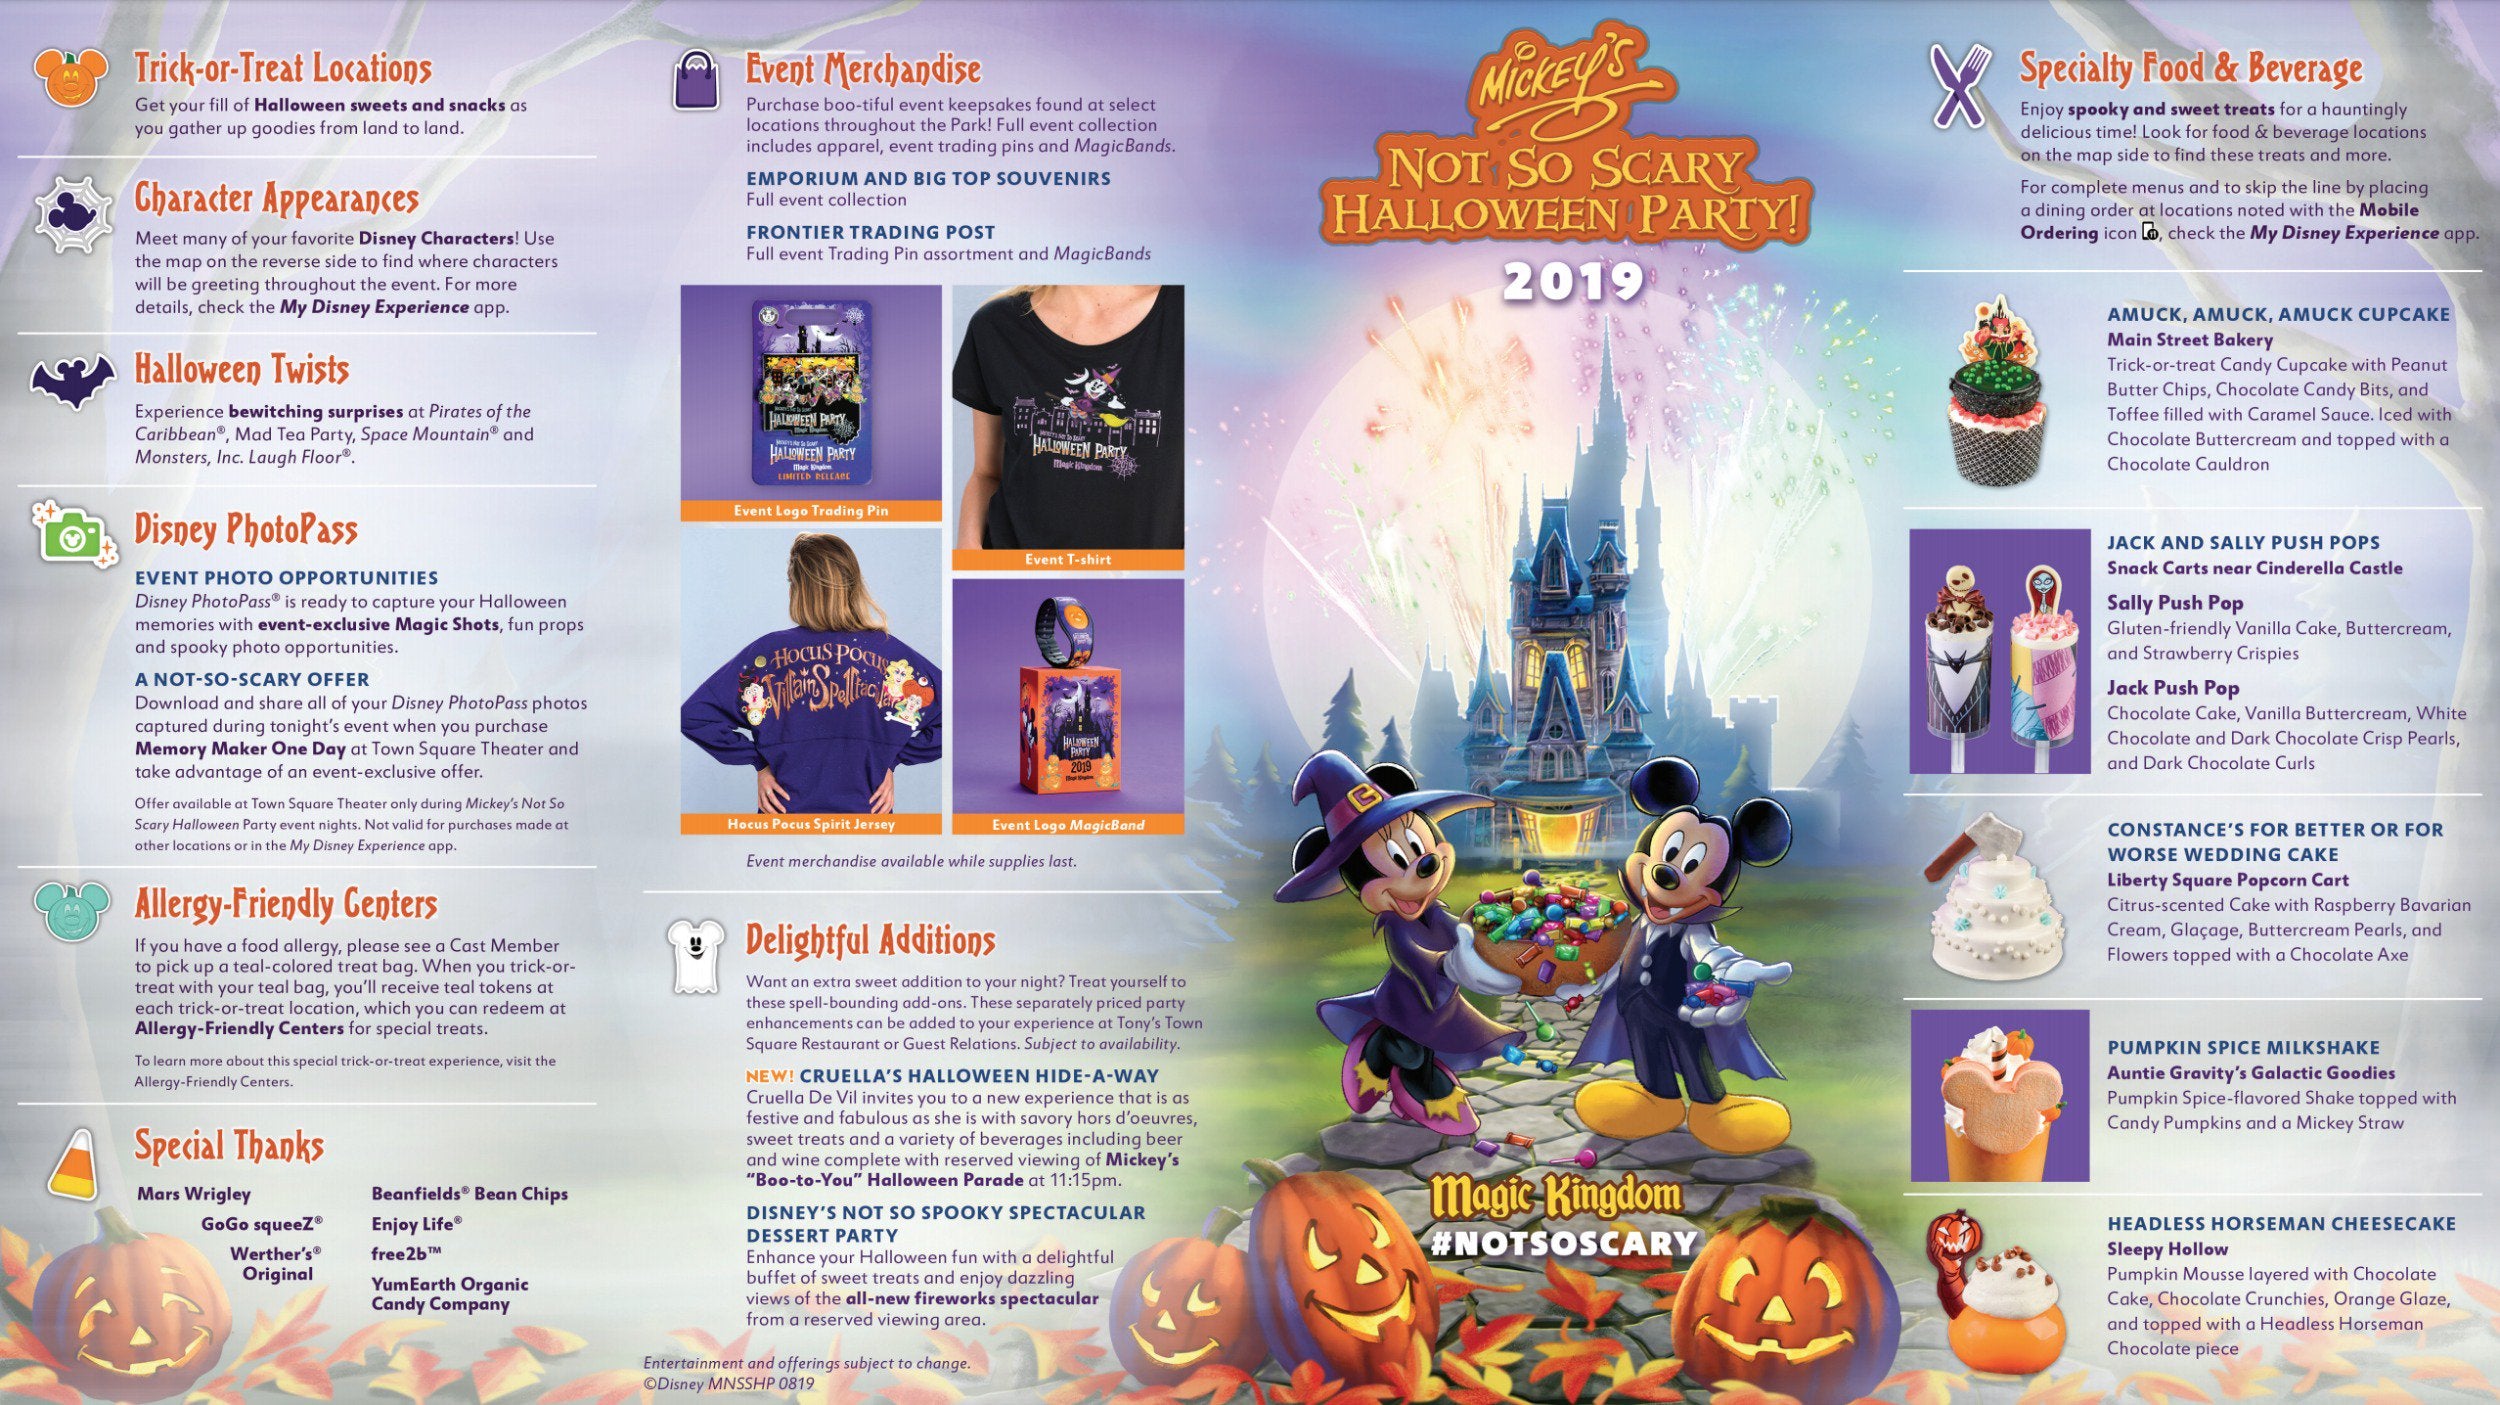 mickeys not so scary halloween party food and beverage 2020 Mickey S Not So Scary Halloween Party 2020 Double Your Wdw mickeys not so scary halloween party food and beverage 2020